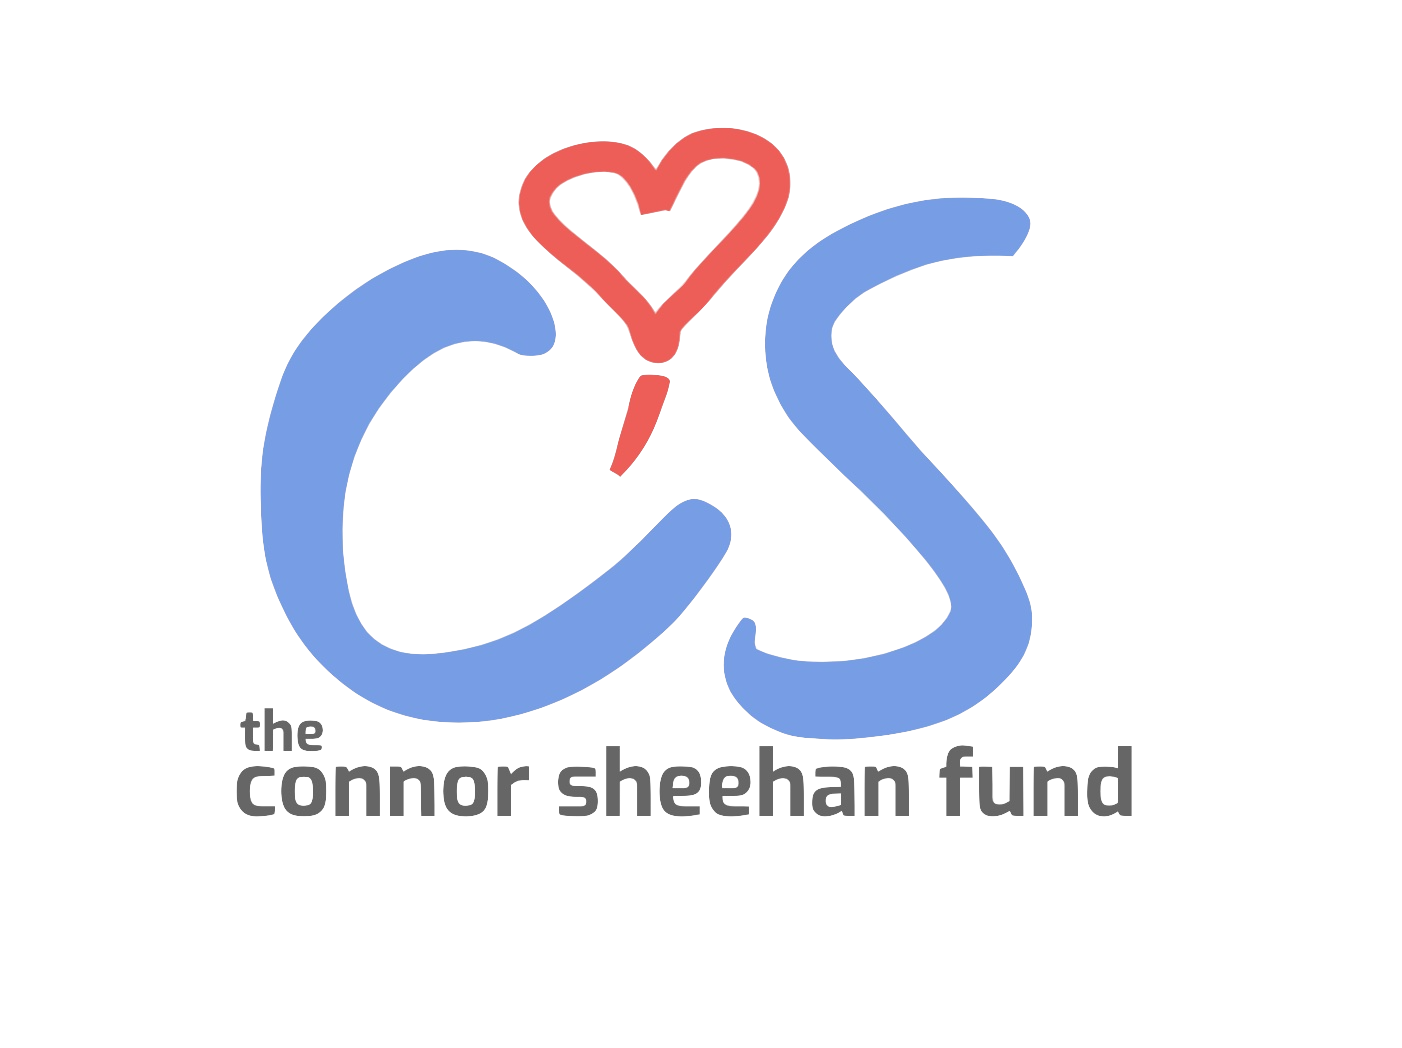 The Connor Sheehan Fund